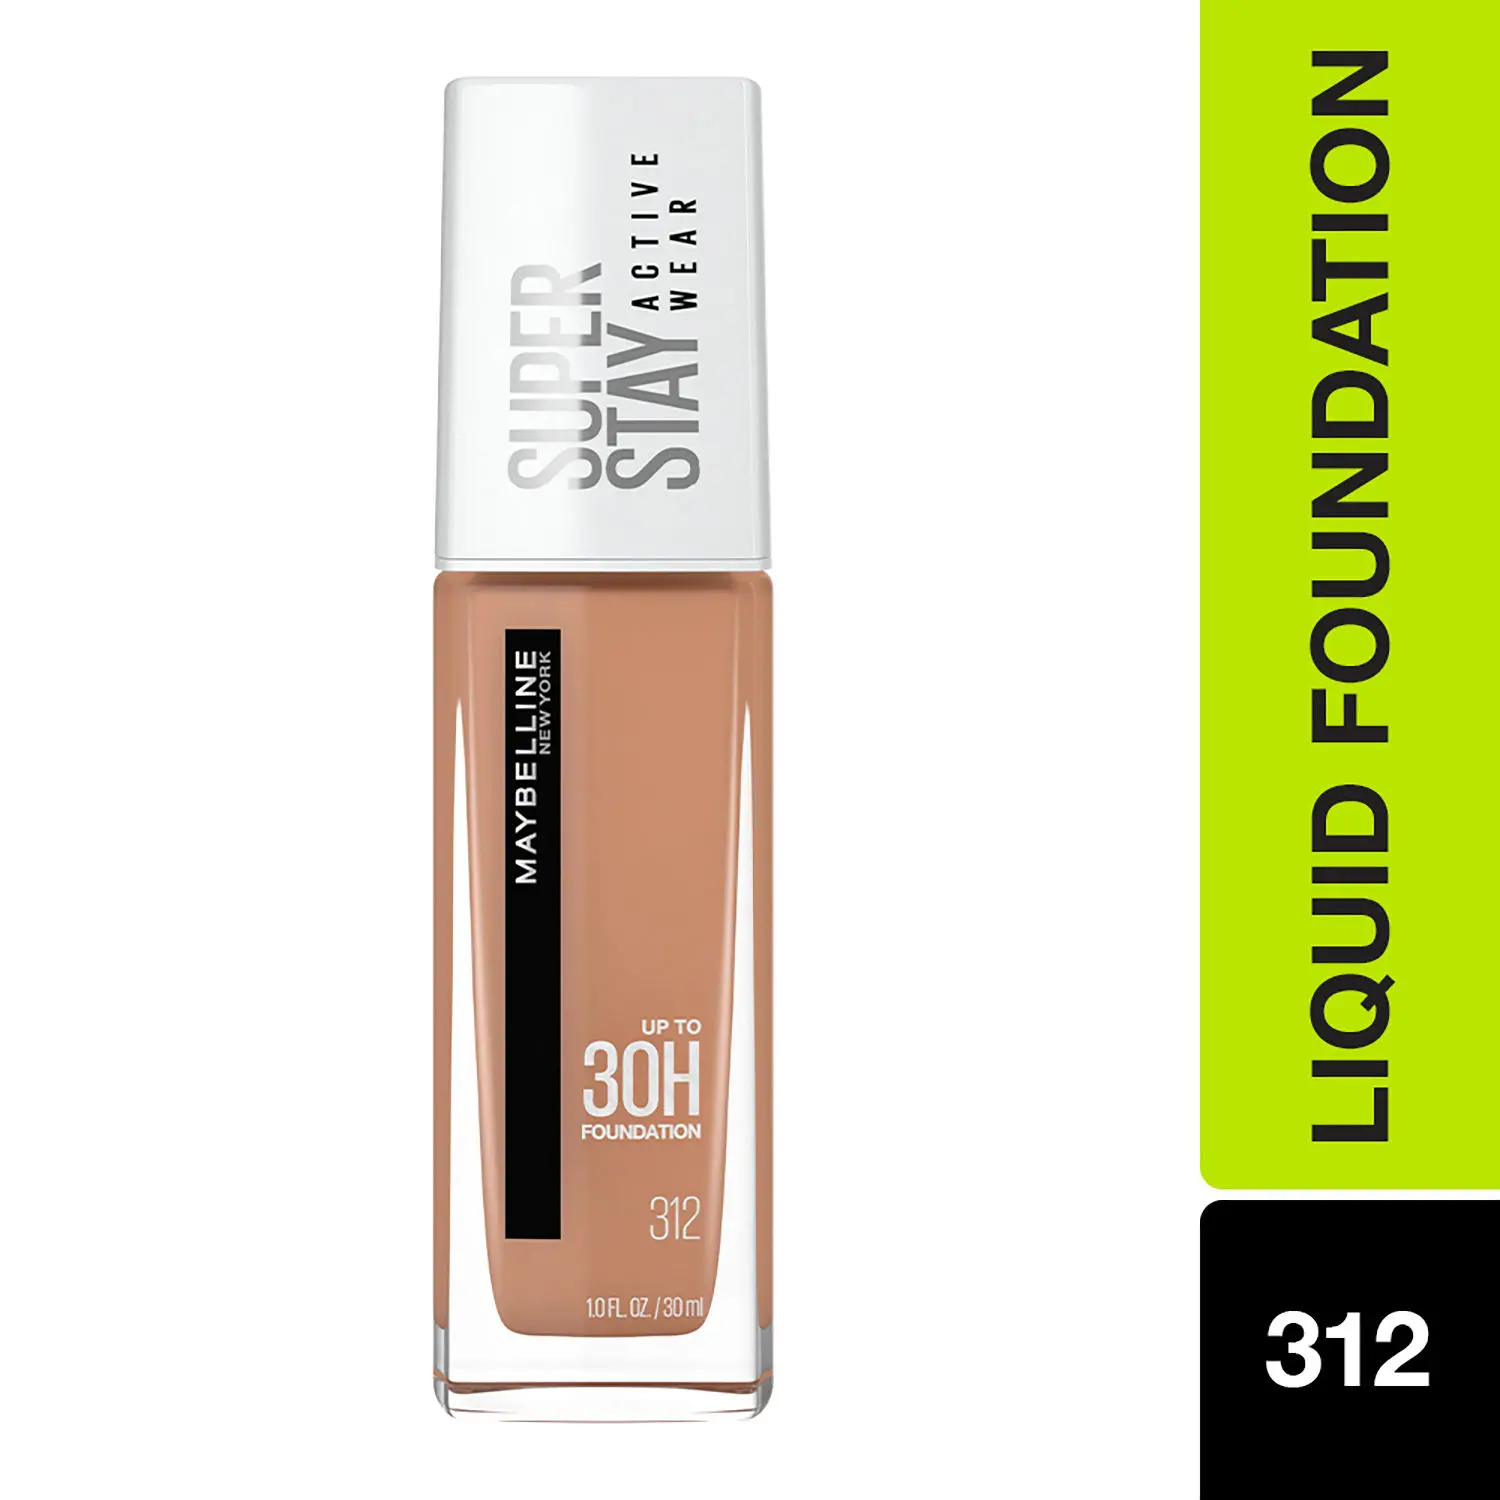 Maybelline New York Super Stay Full Coverage Active Wear Liquid Foundation, Matte Finish with 30 HR Wear, Transfer Proof, 312, Golden, 30ml